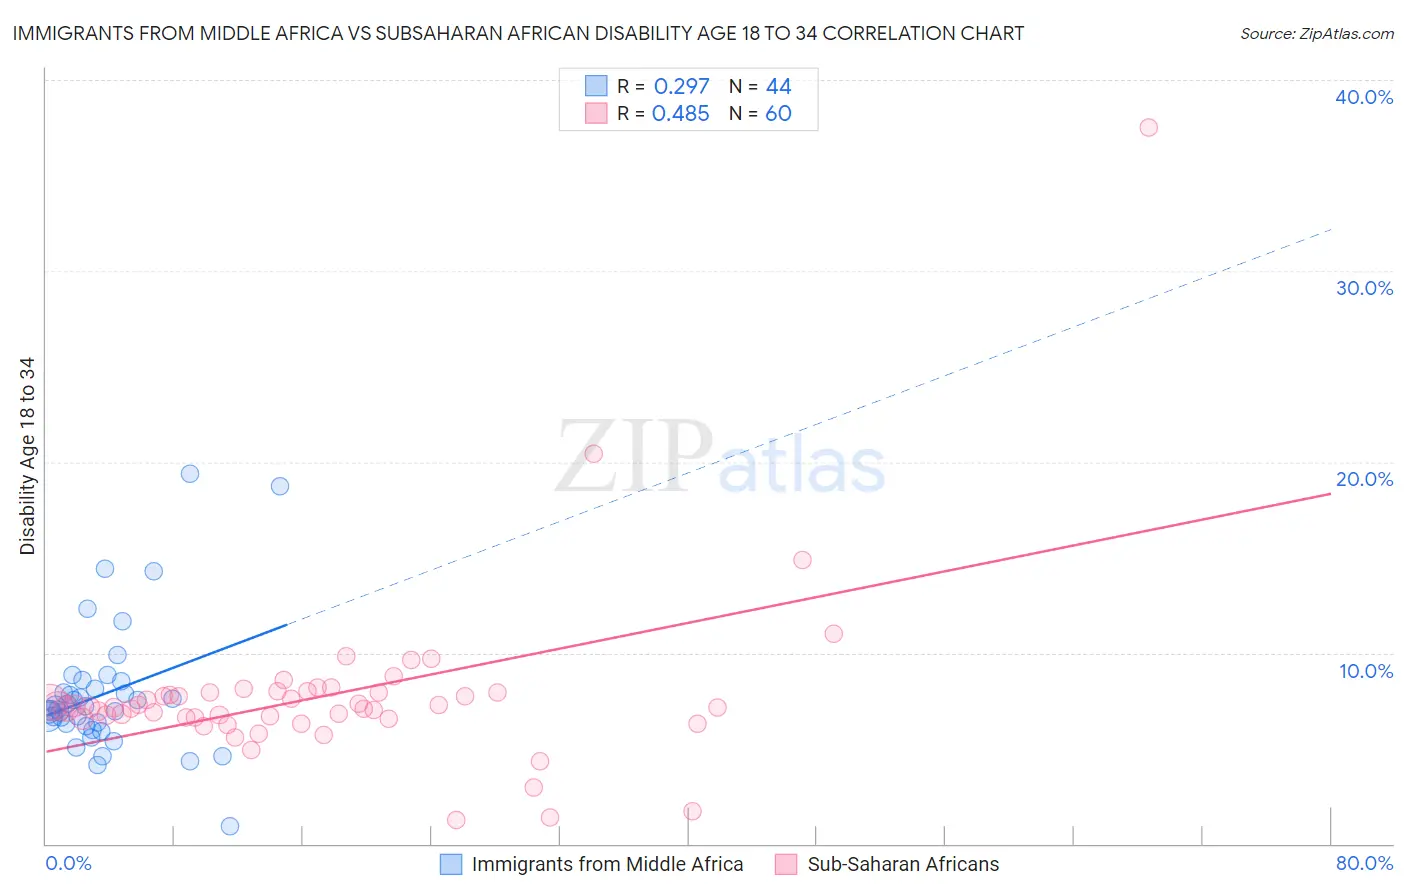 Immigrants from Middle Africa vs Subsaharan African Disability Age 18 to 34